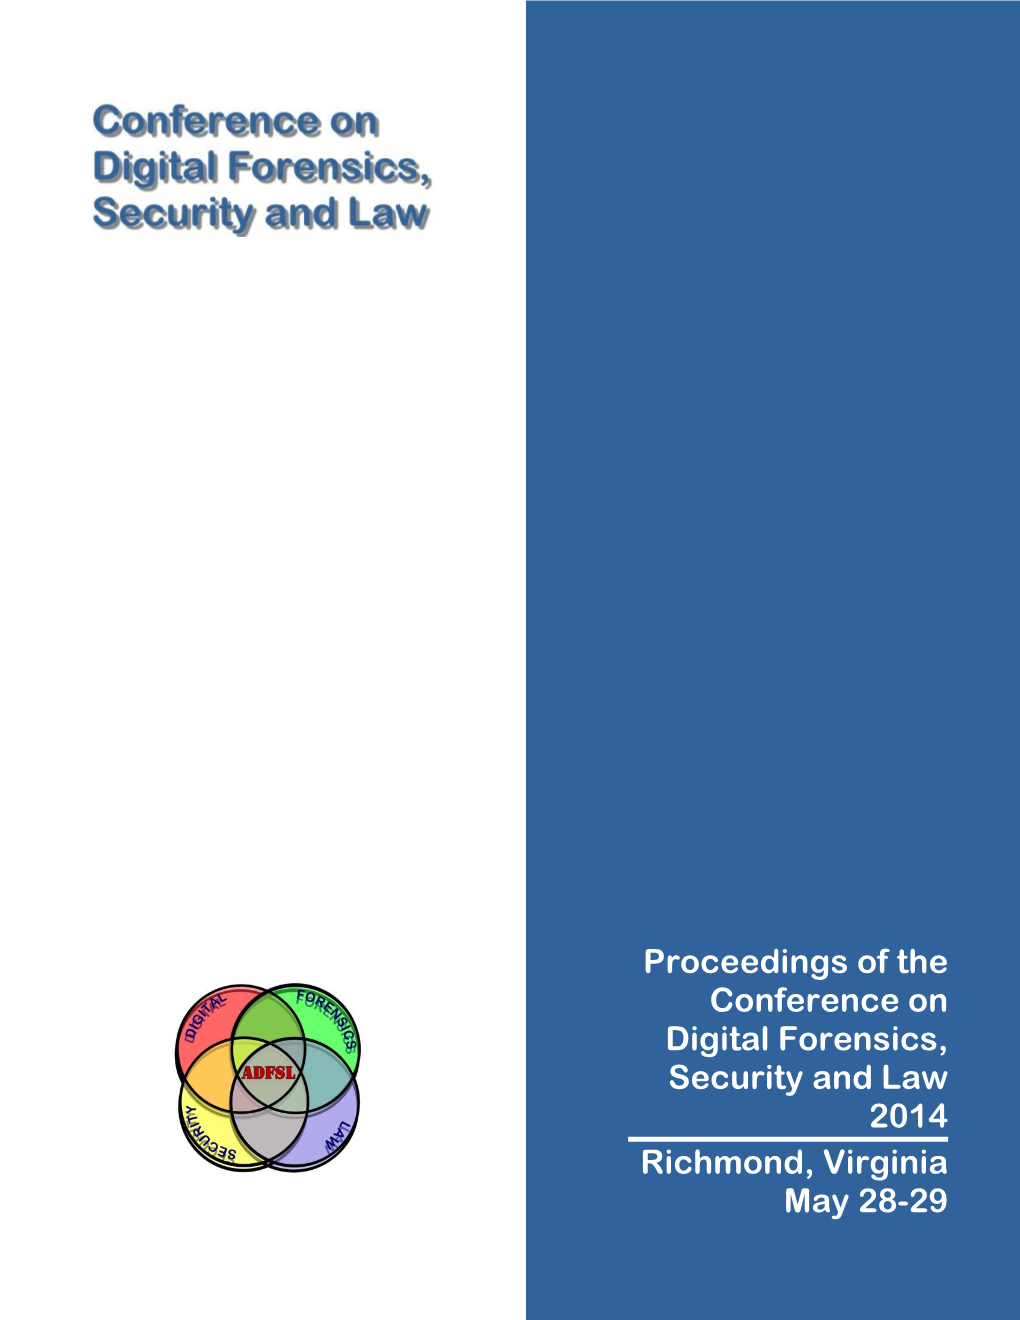 Proceedings of the Conference on Digital Forensics, Security and Law 2014 Richmond, Virginia May 28-29